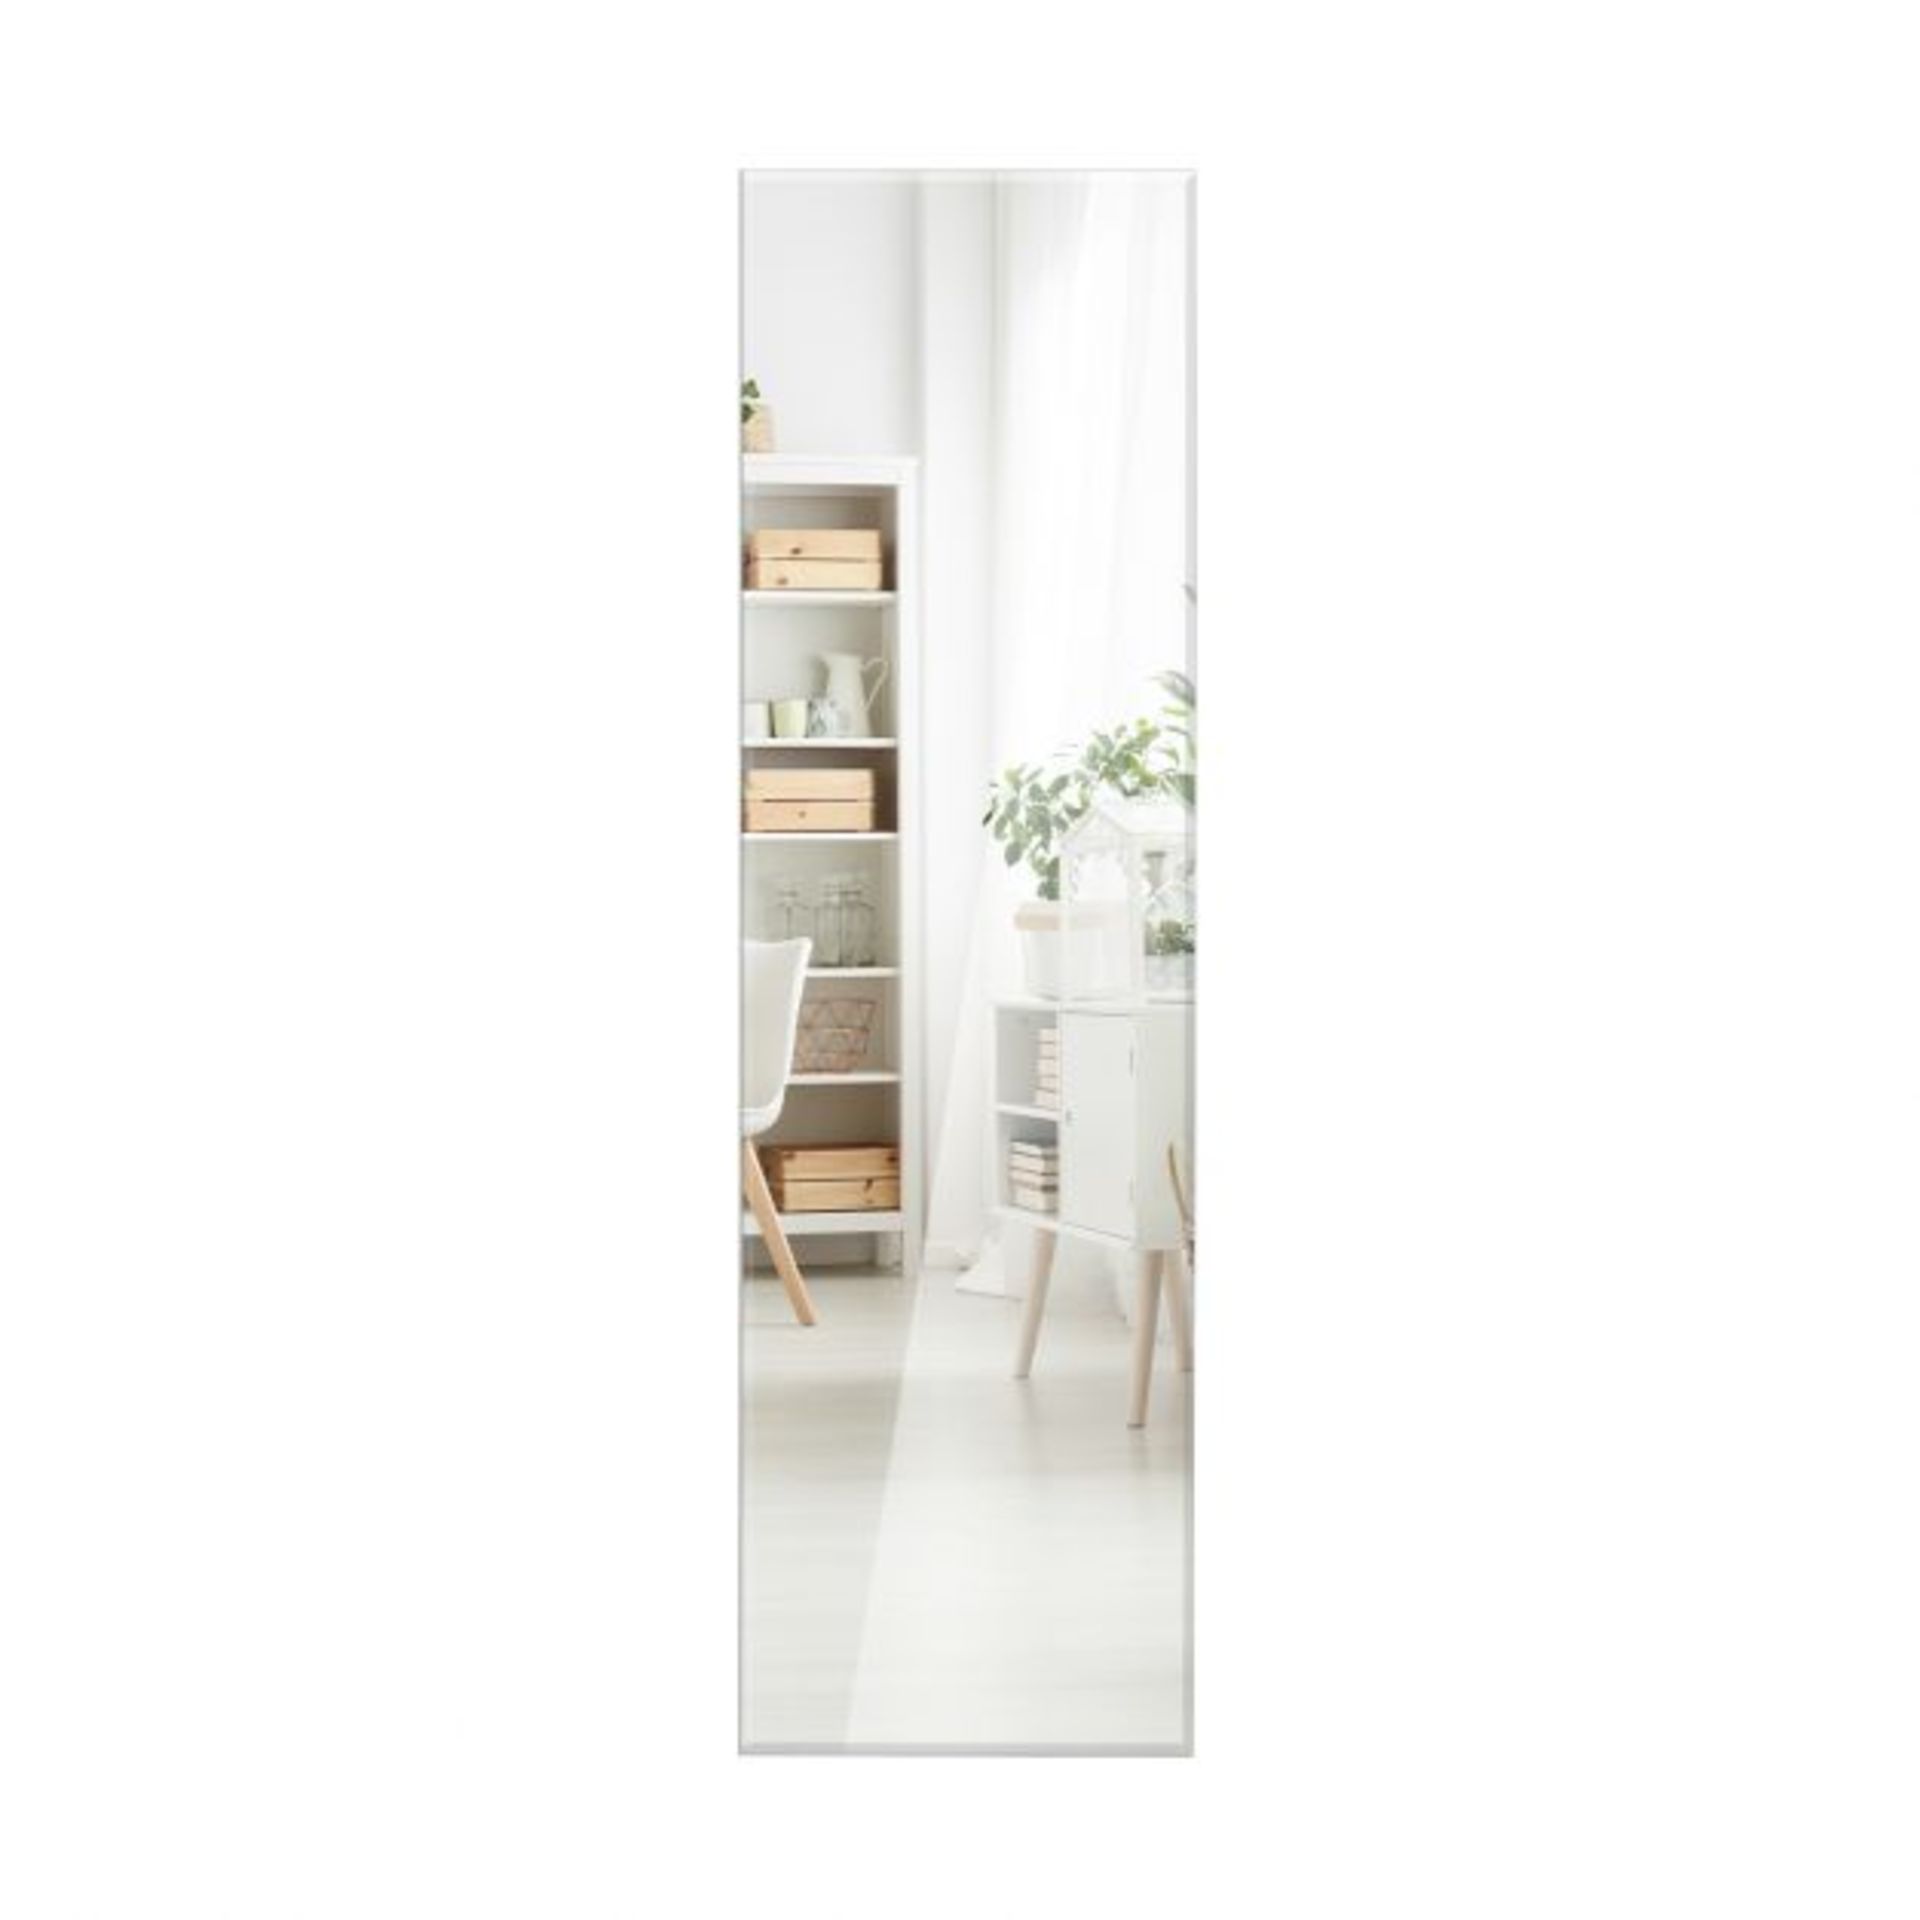 Full Length Wall Mounted Mirror for Bathroom Bedroom Entryway - RRP £57.99 (LOCATION - H/S R 4.1)